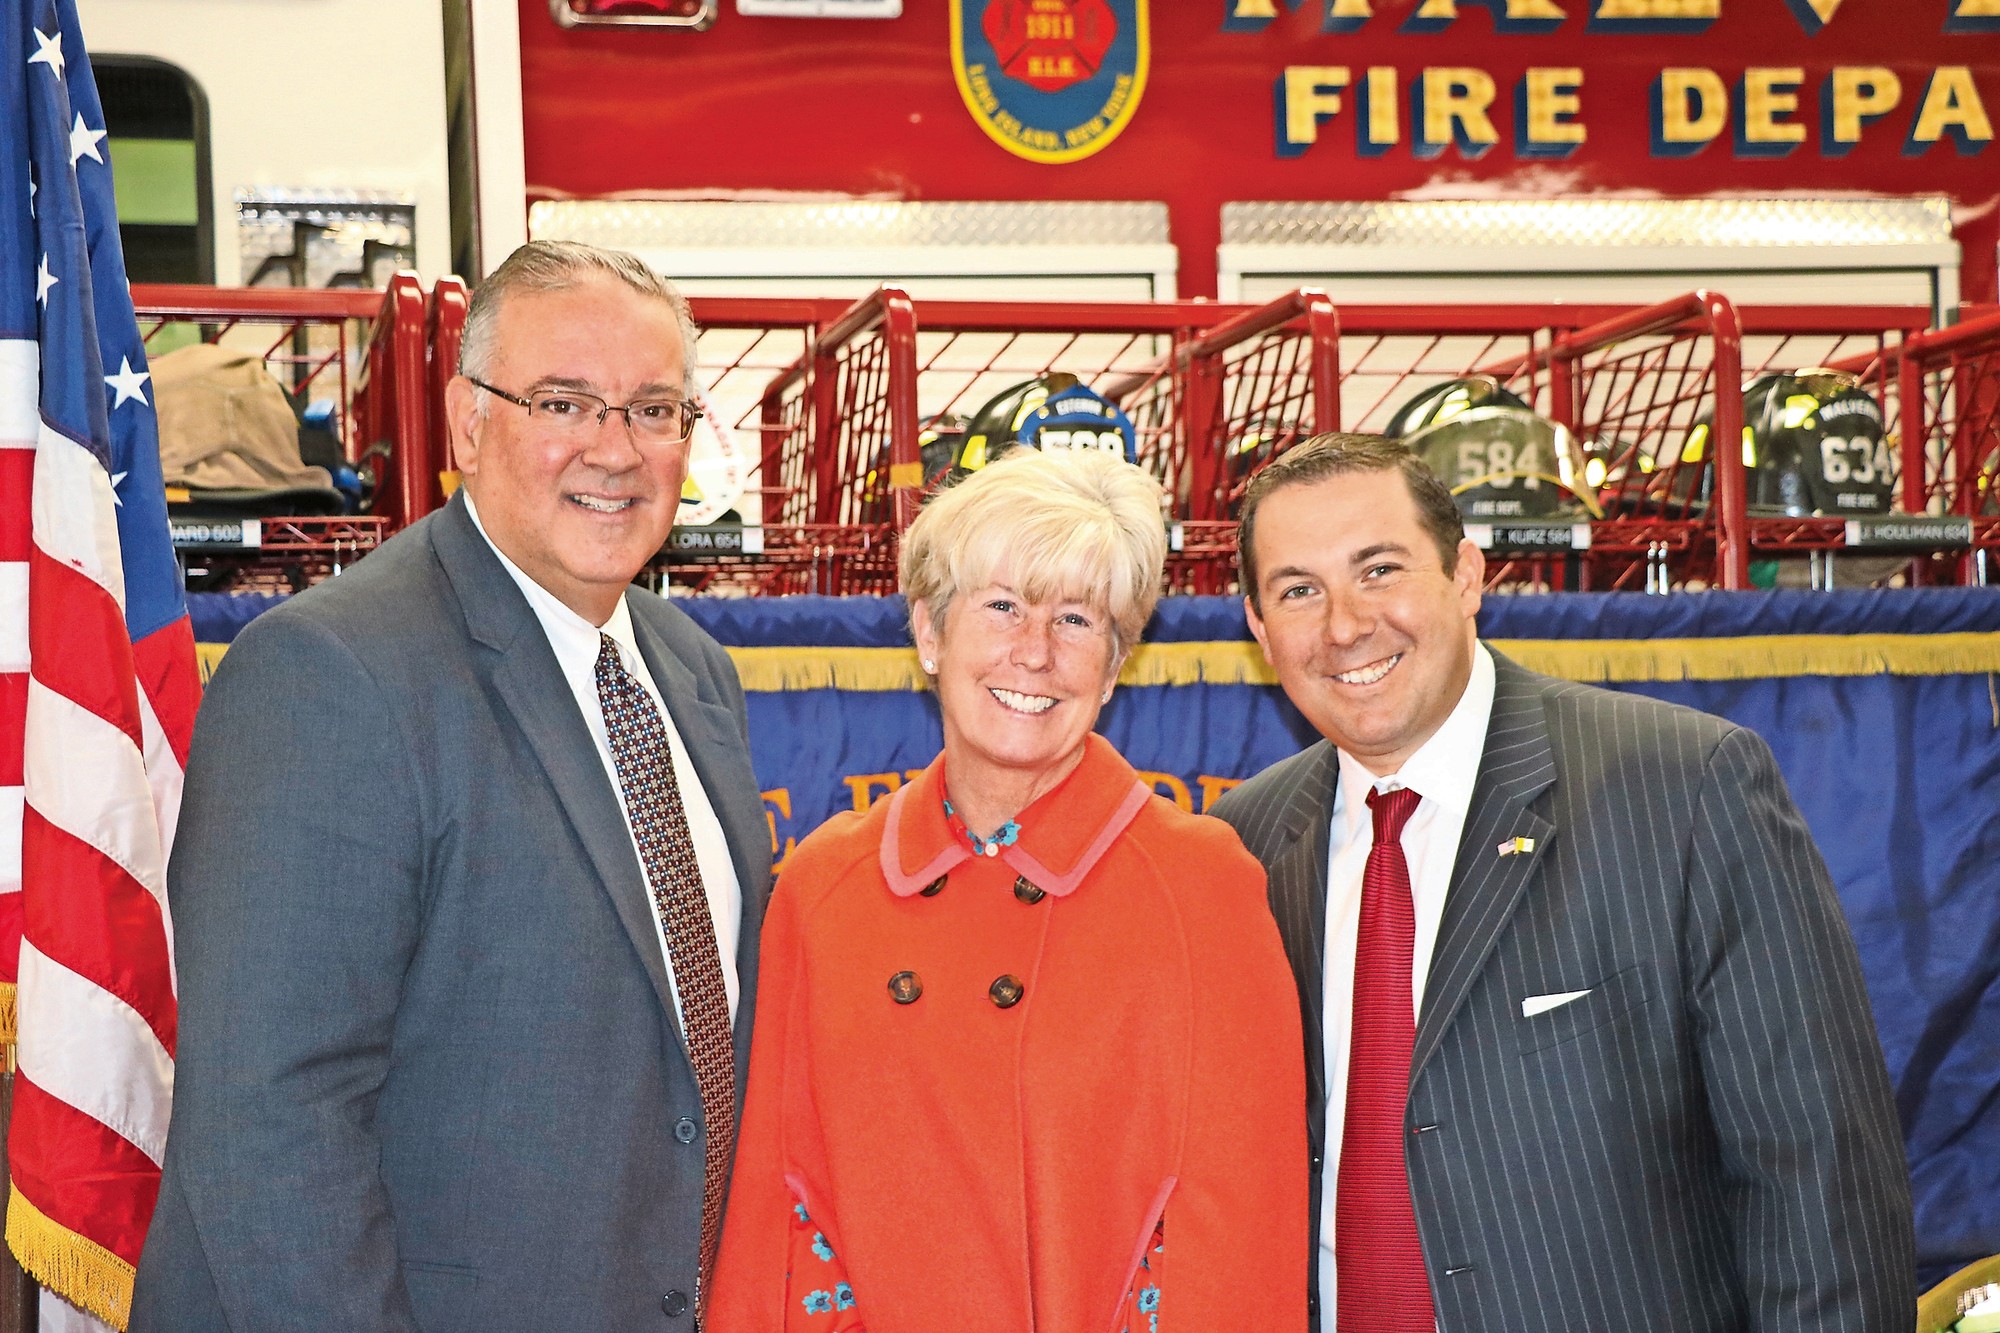 Mayor Patricia McDonald with Malverne residents Tom Grech, left, and Vincent LaVien at the Malverne firehouse last week.